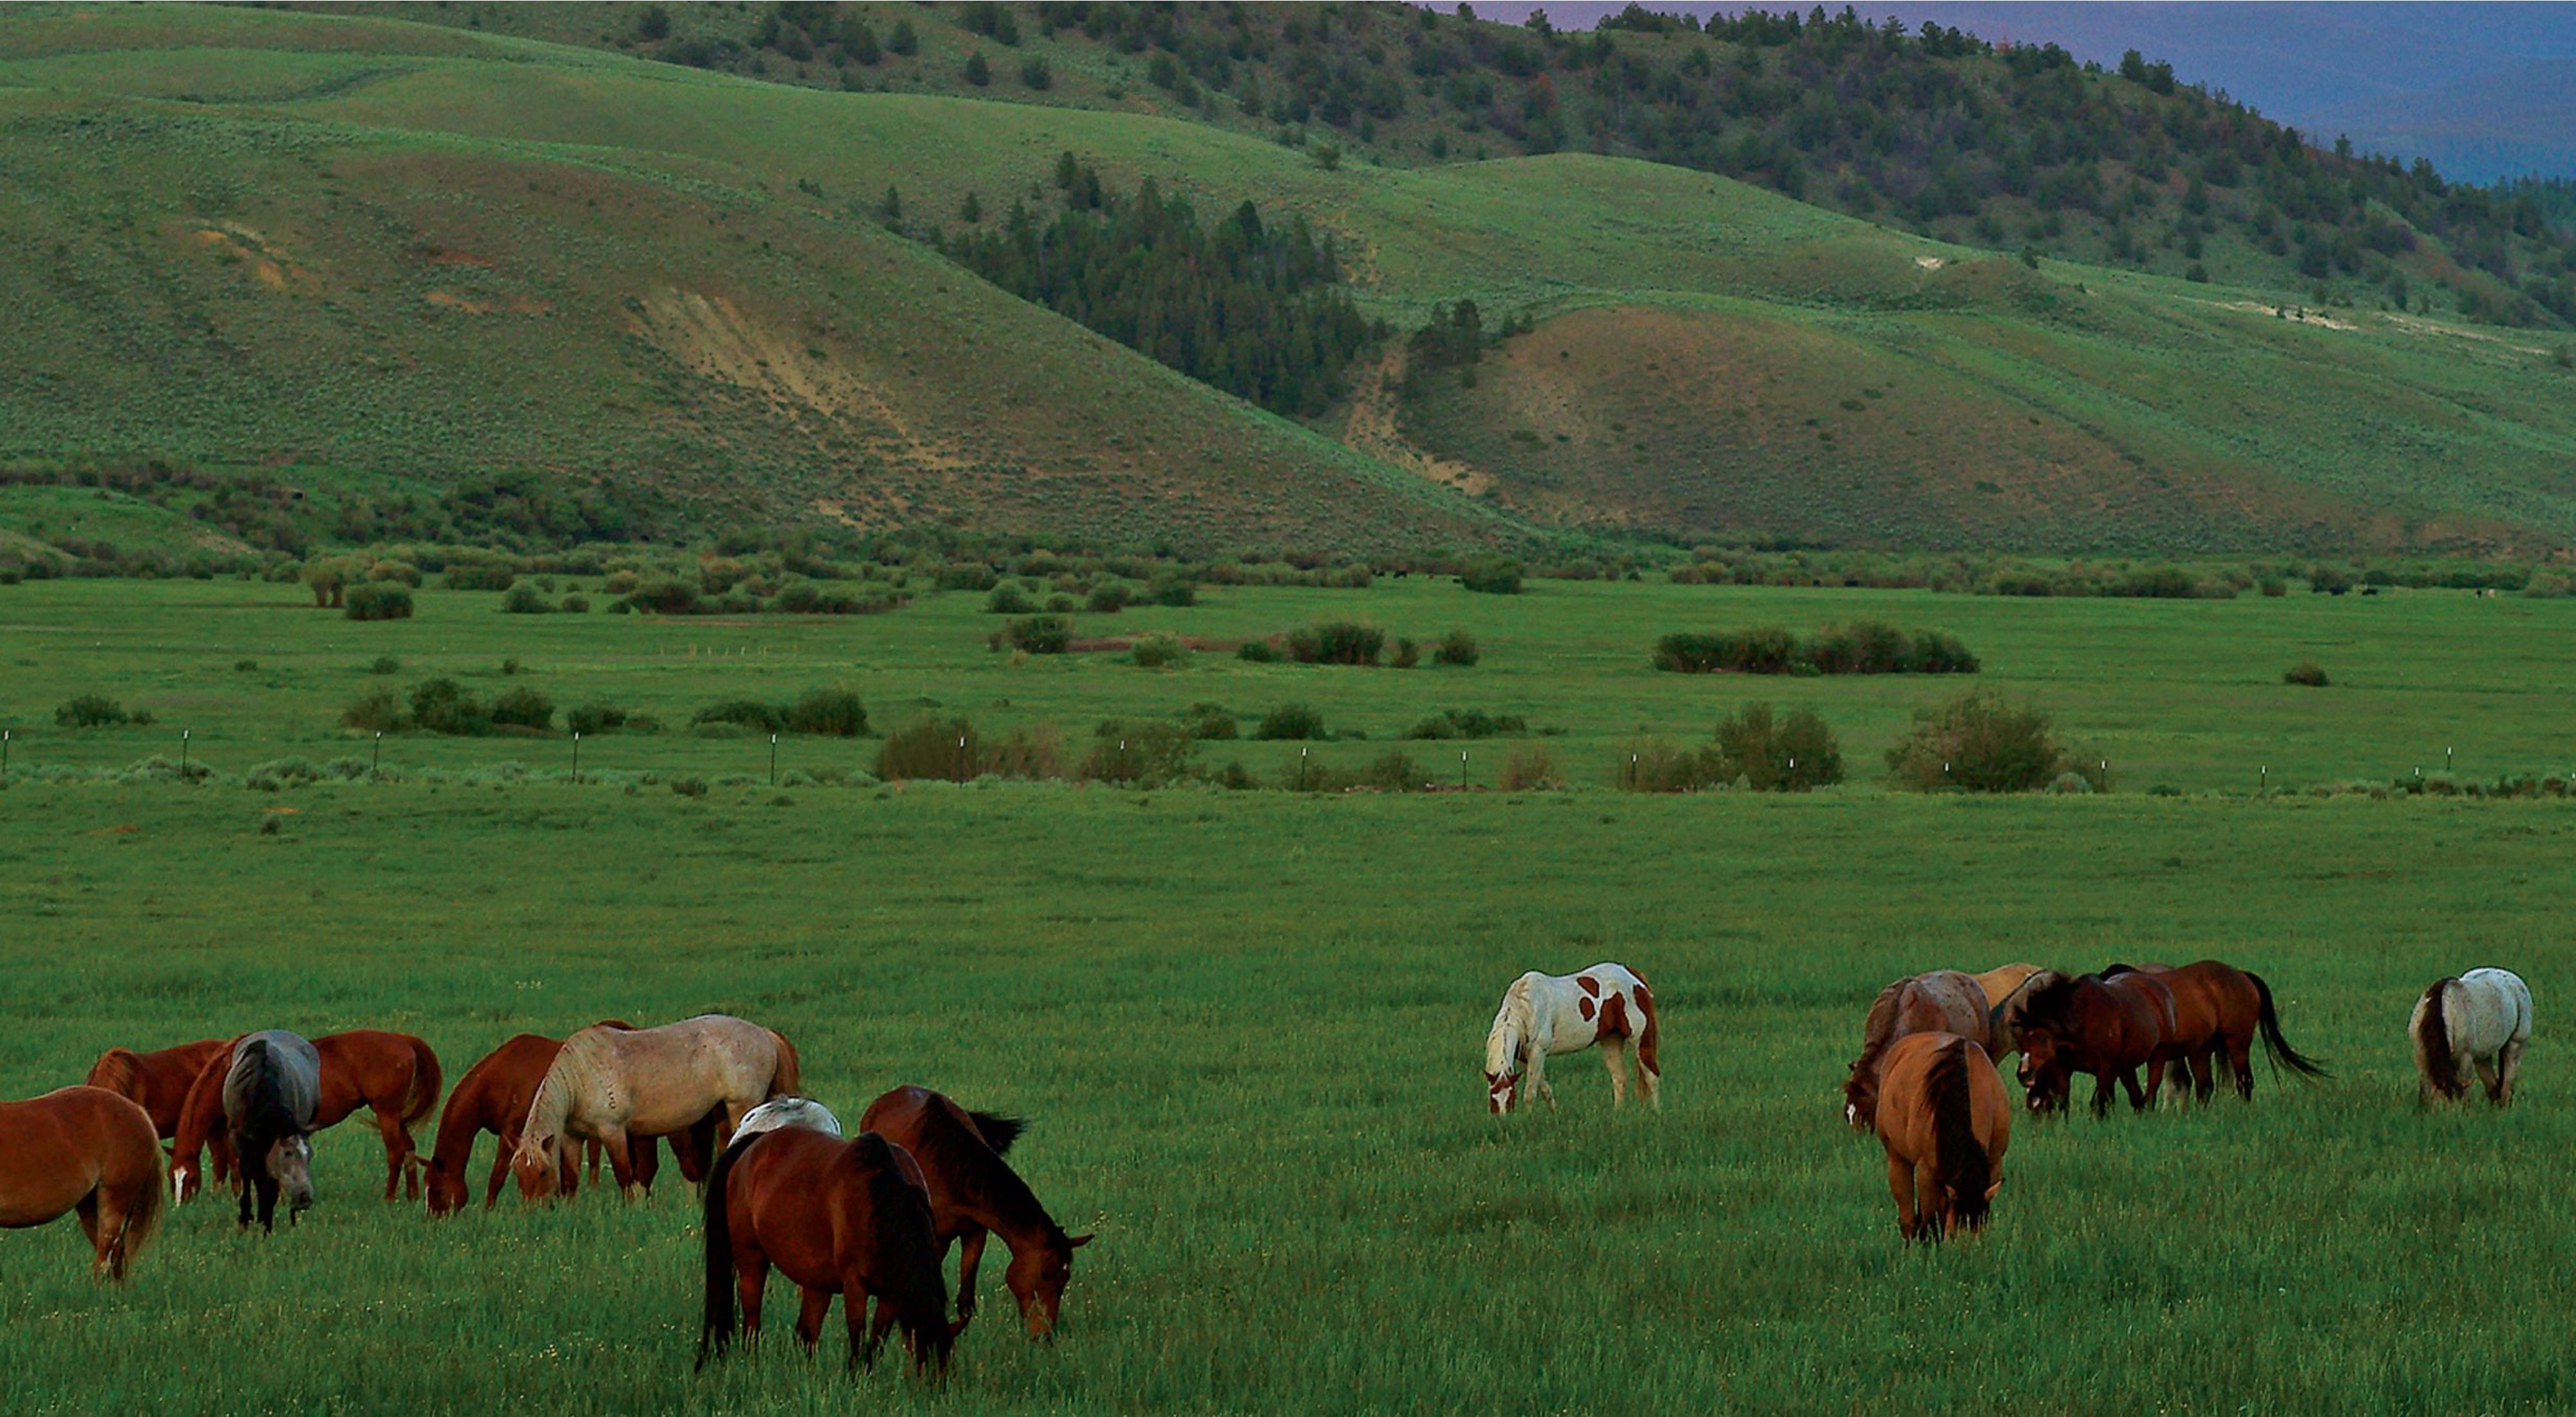 Horses on green field with green hills in the background at sunset.